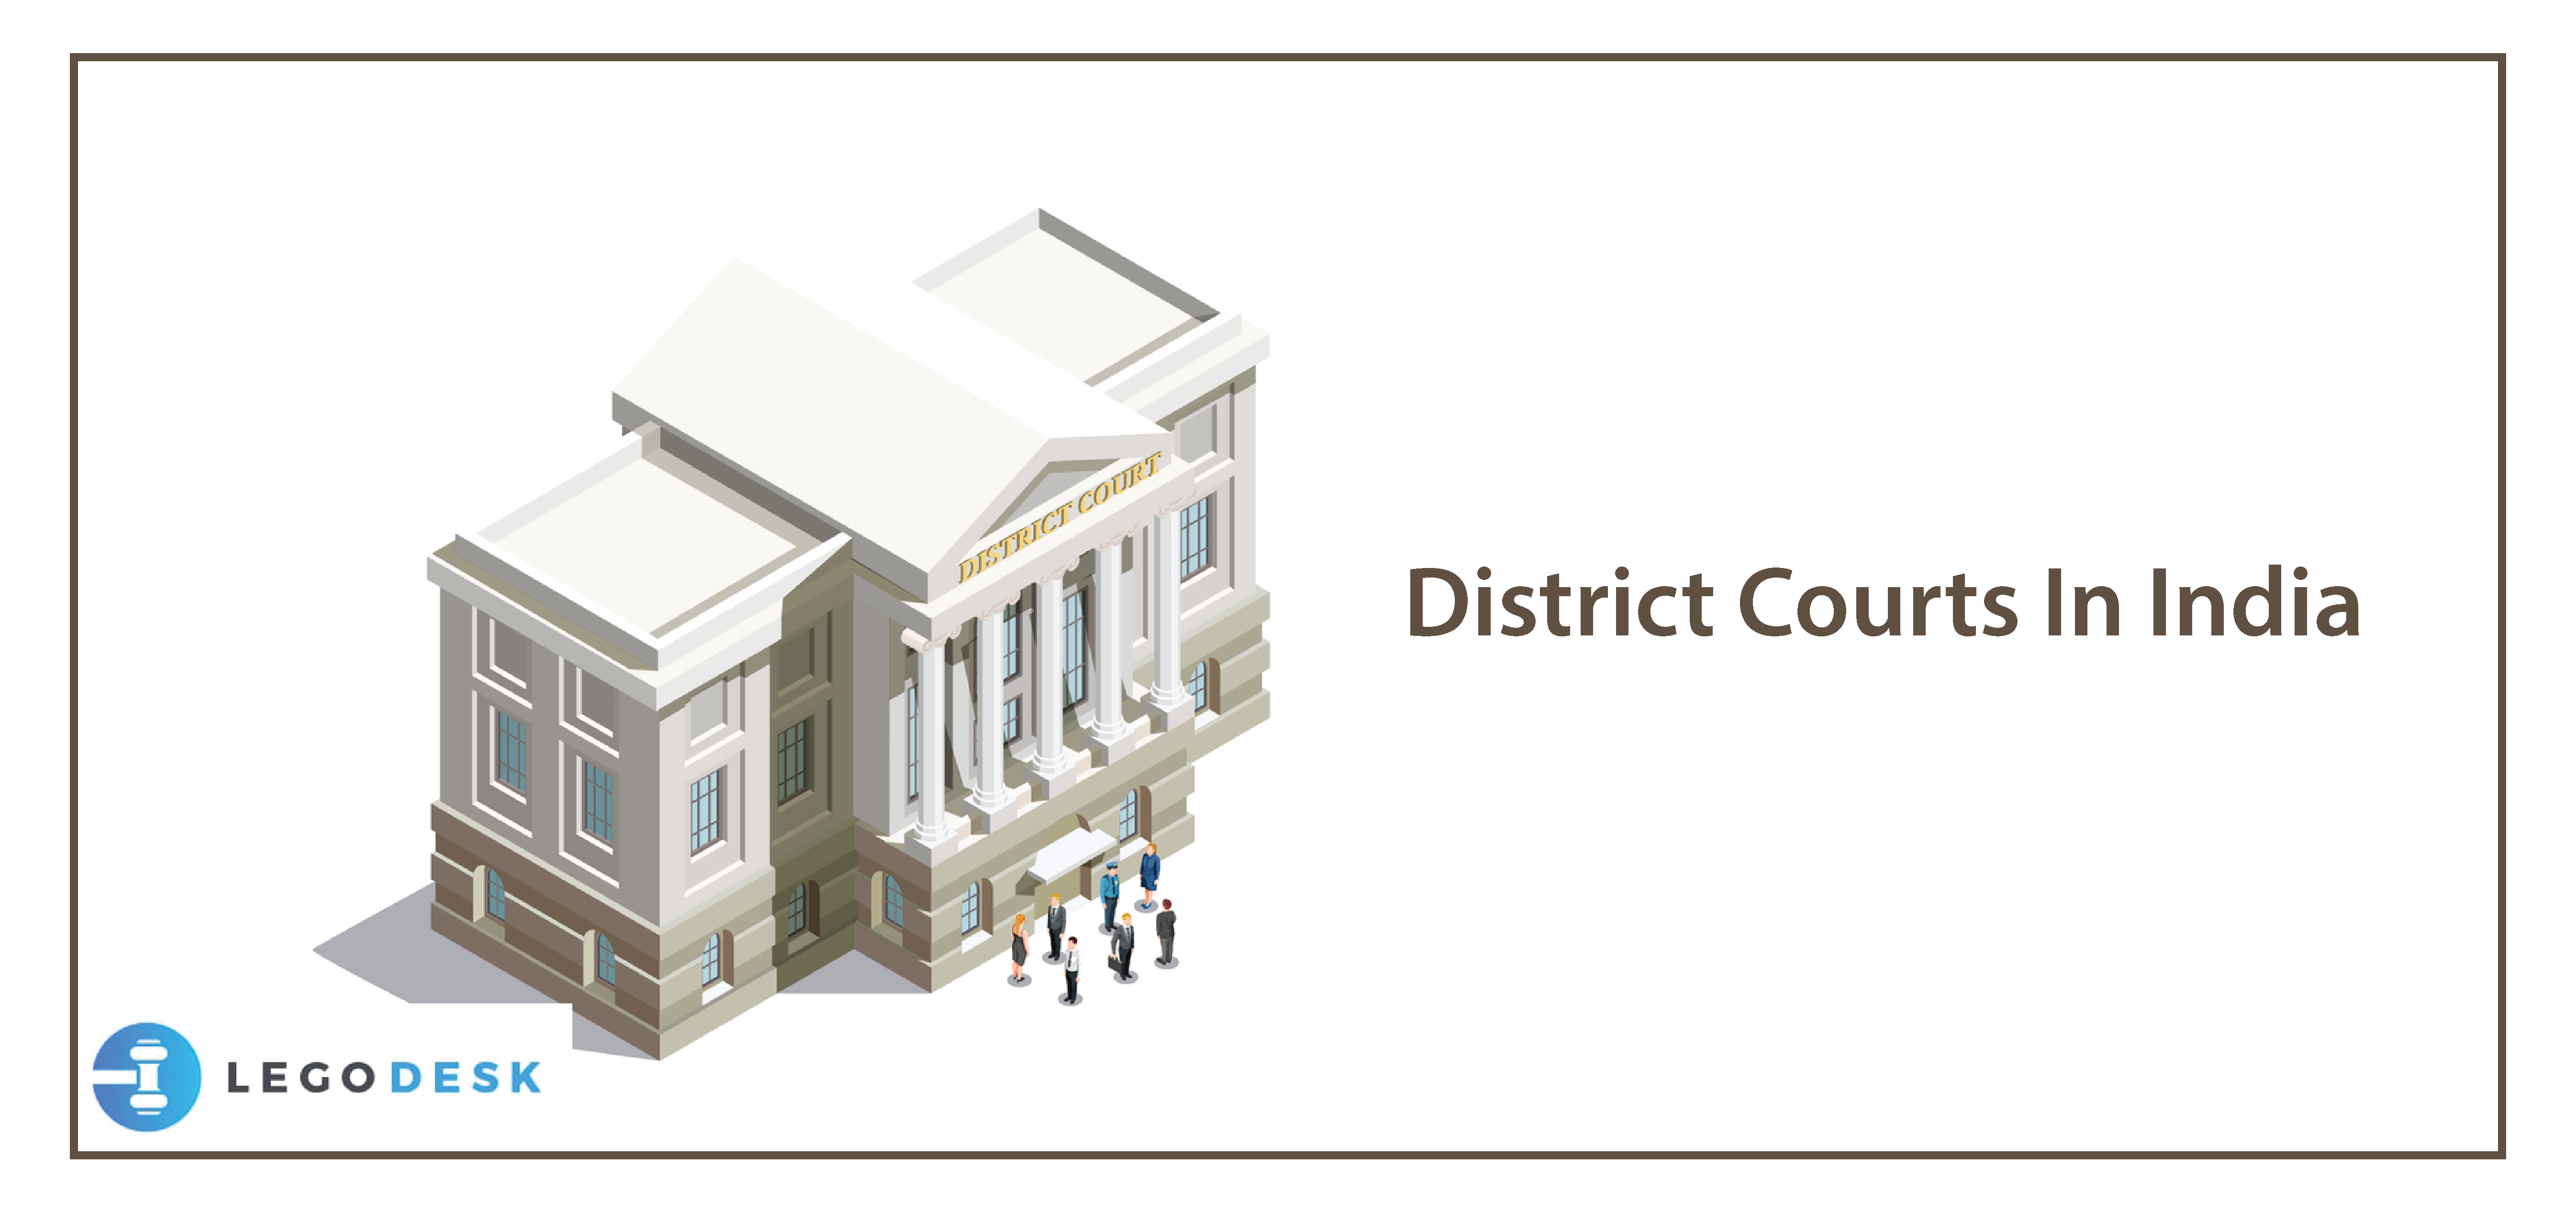 District Courts In India